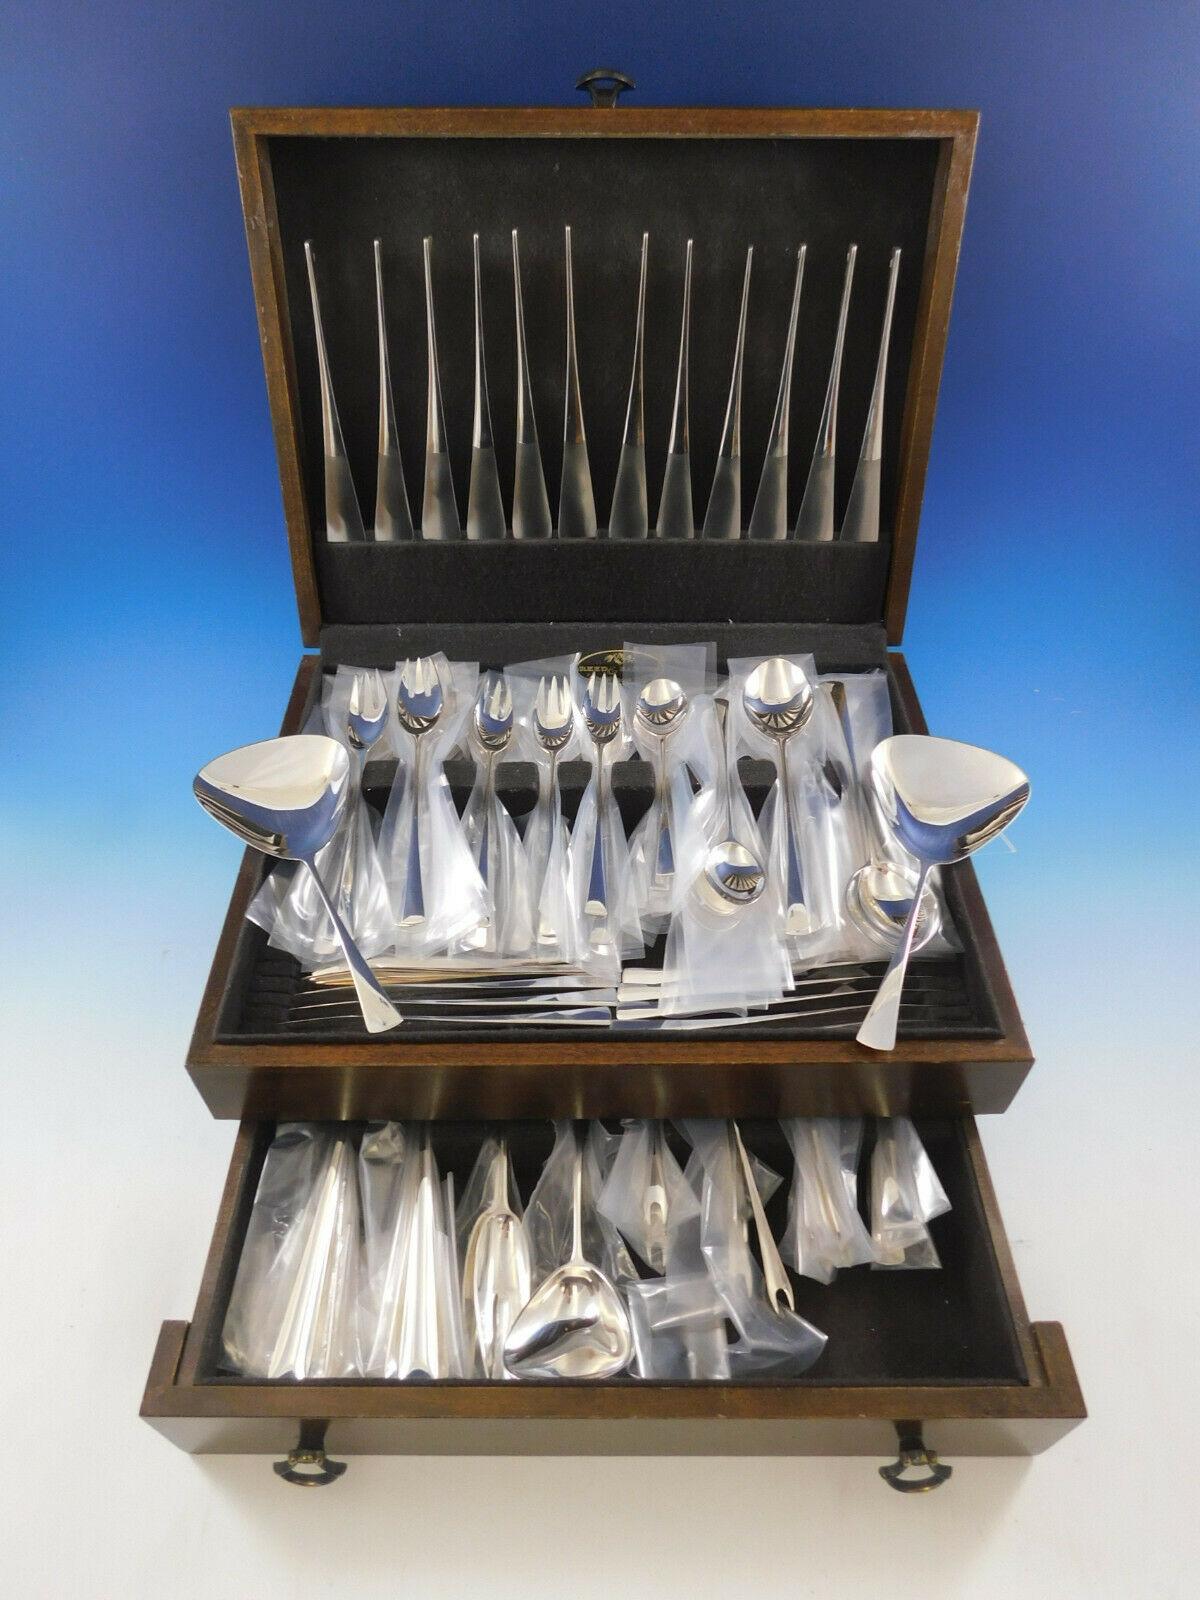 Monumental Scandinavian Modern Tjorn by Dansk sterling silver flatware set, 110 pieces. This set includes many exceedingly rare pieces and features solid handle knives with innovative stainless blades that are nearly seamless where the blade meets